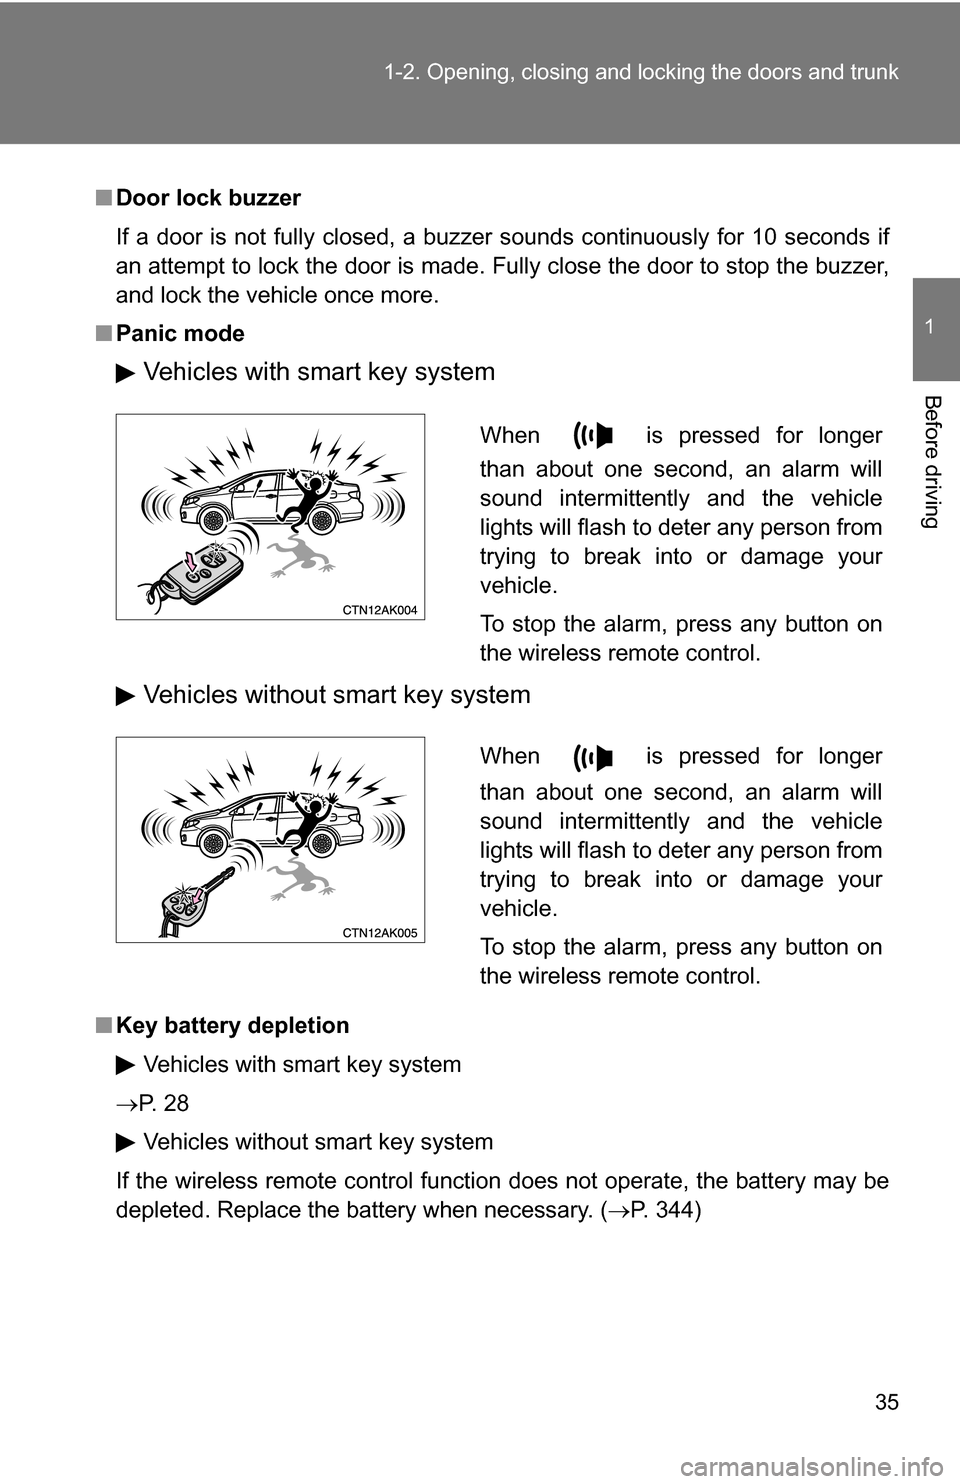 TOYOTA COROLLA 2009 10.G Owners Guide 35
1-2. Opening, closing and locking the doors and trunk
1
Before driving
■
Door lock buzzer
If a door is not fully closed, a buzzer sounds continuously for 10 seconds if
an attempt to lock the door